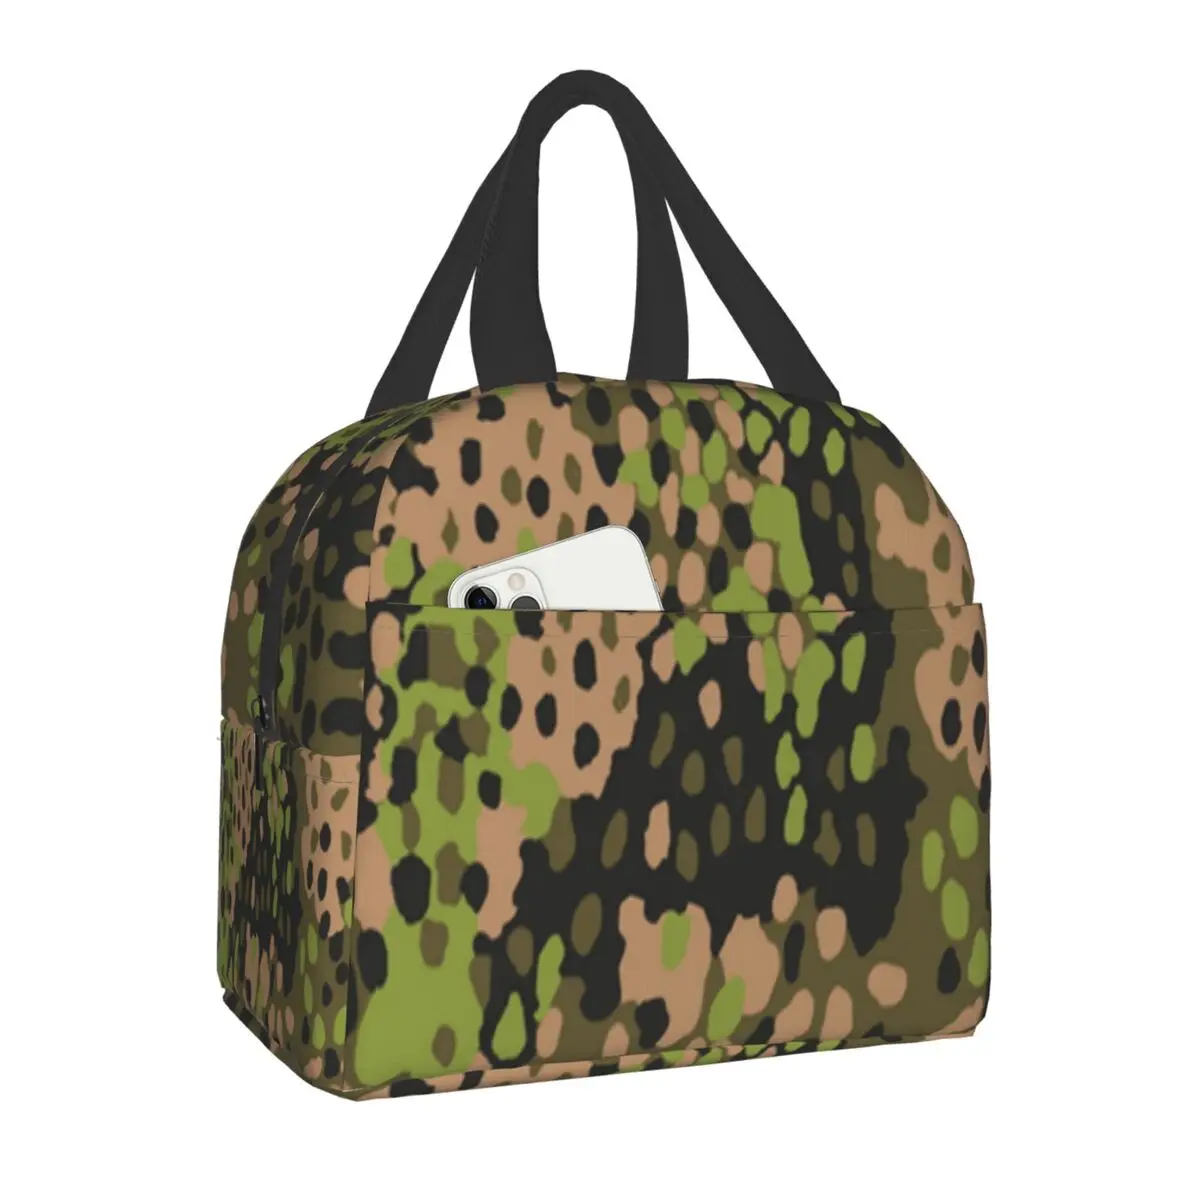 WW2 Camo Lunch Box Women Portable Germany Arm Military Camouflage Cooler Thermal Food Insulated Lunch Bag Kids School Bento Box